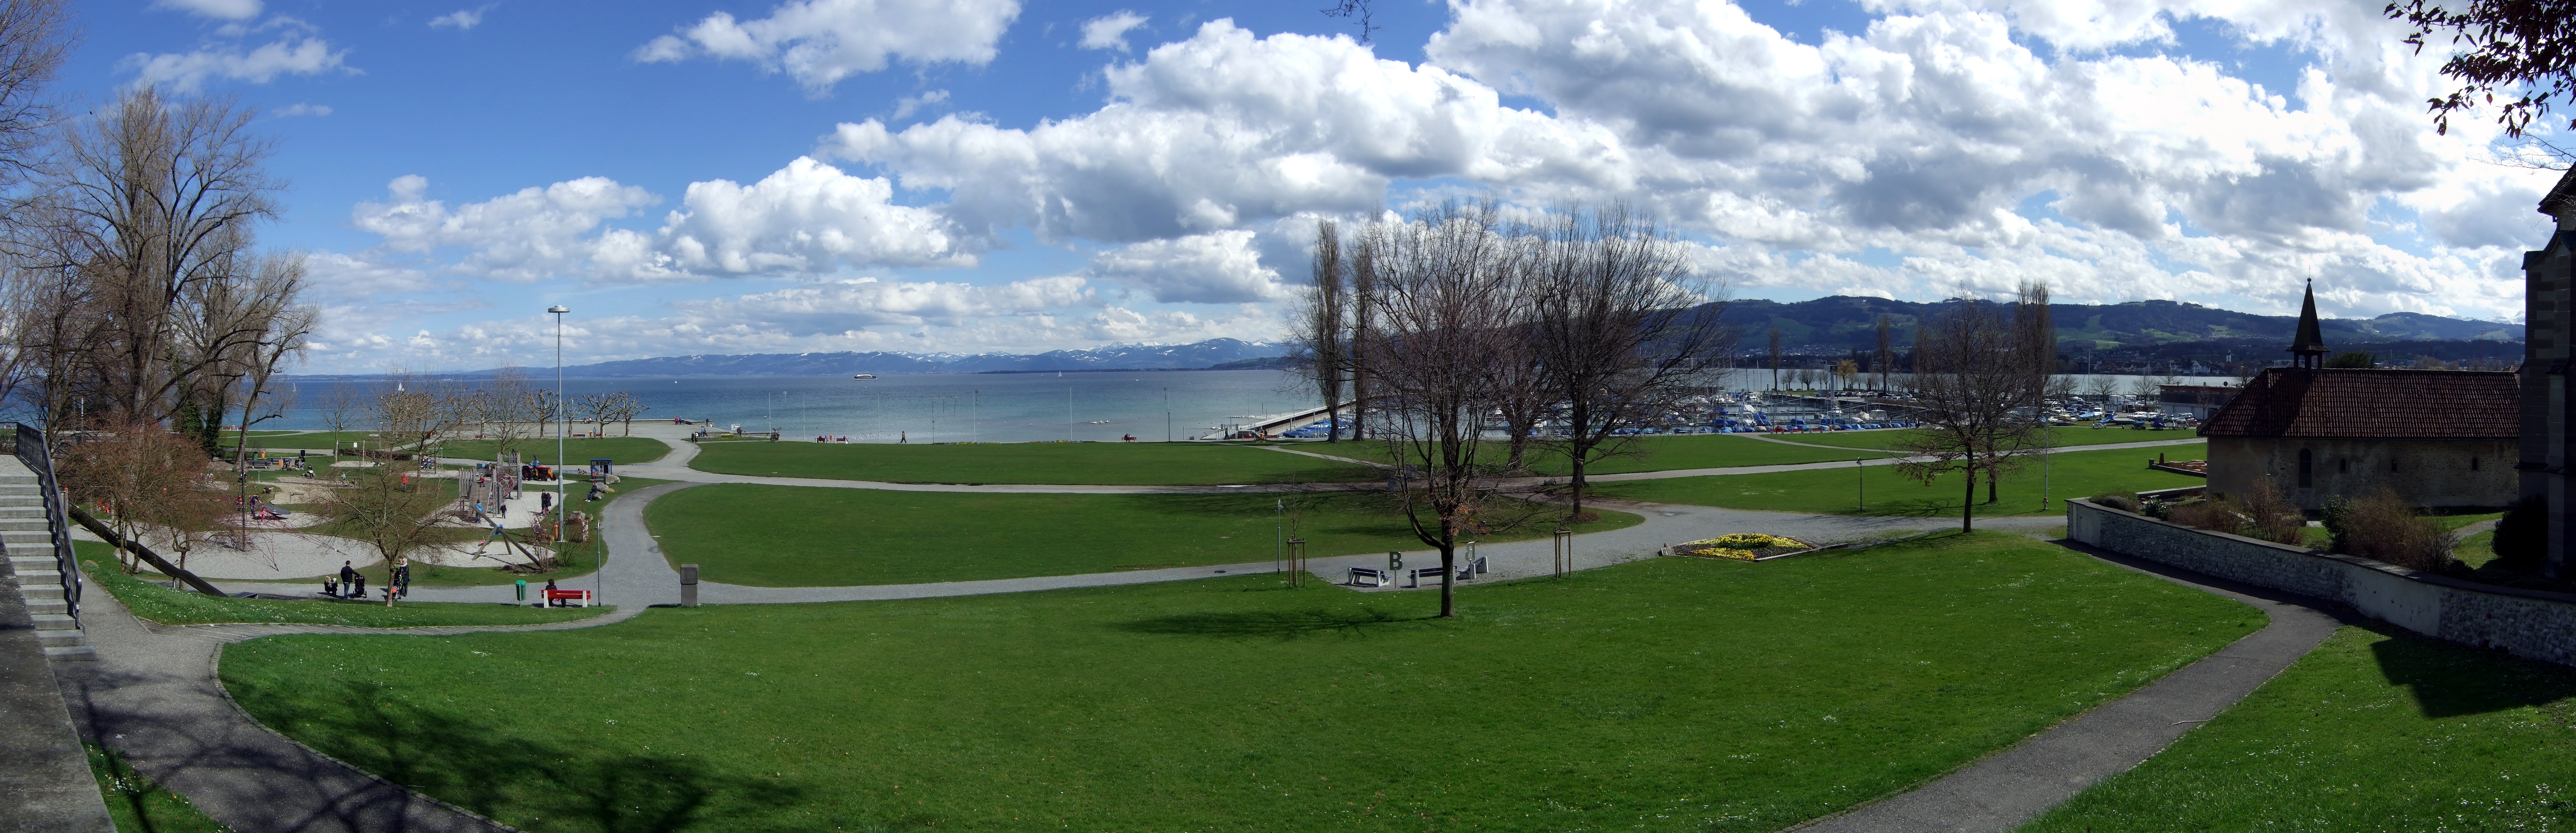 20130413-bodensee-arbon-panorama